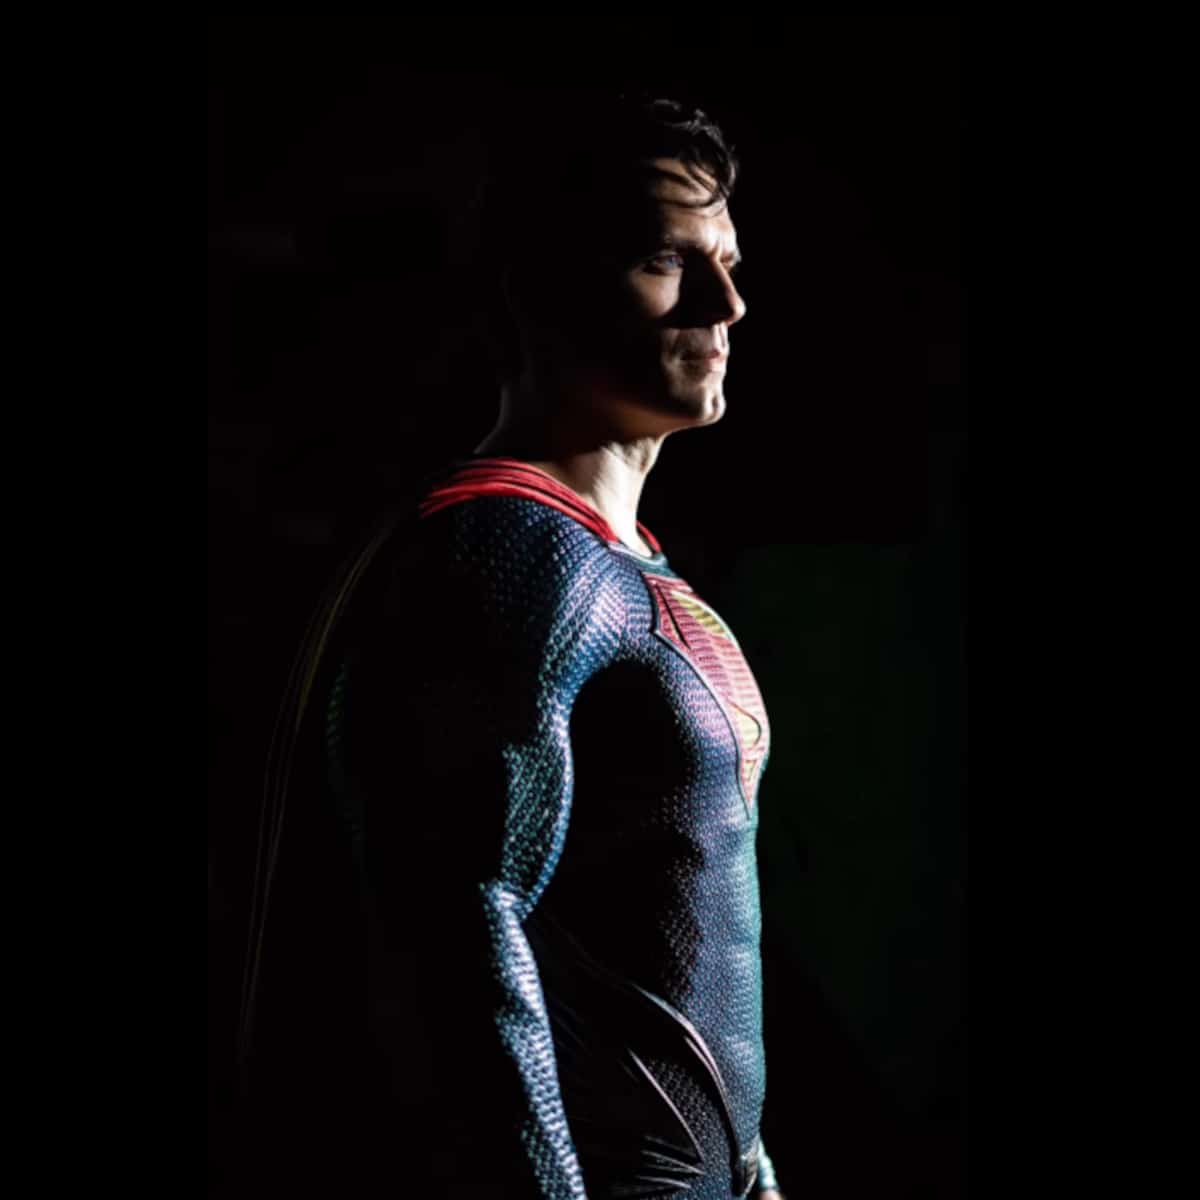 Henry Cavill is back as Superman